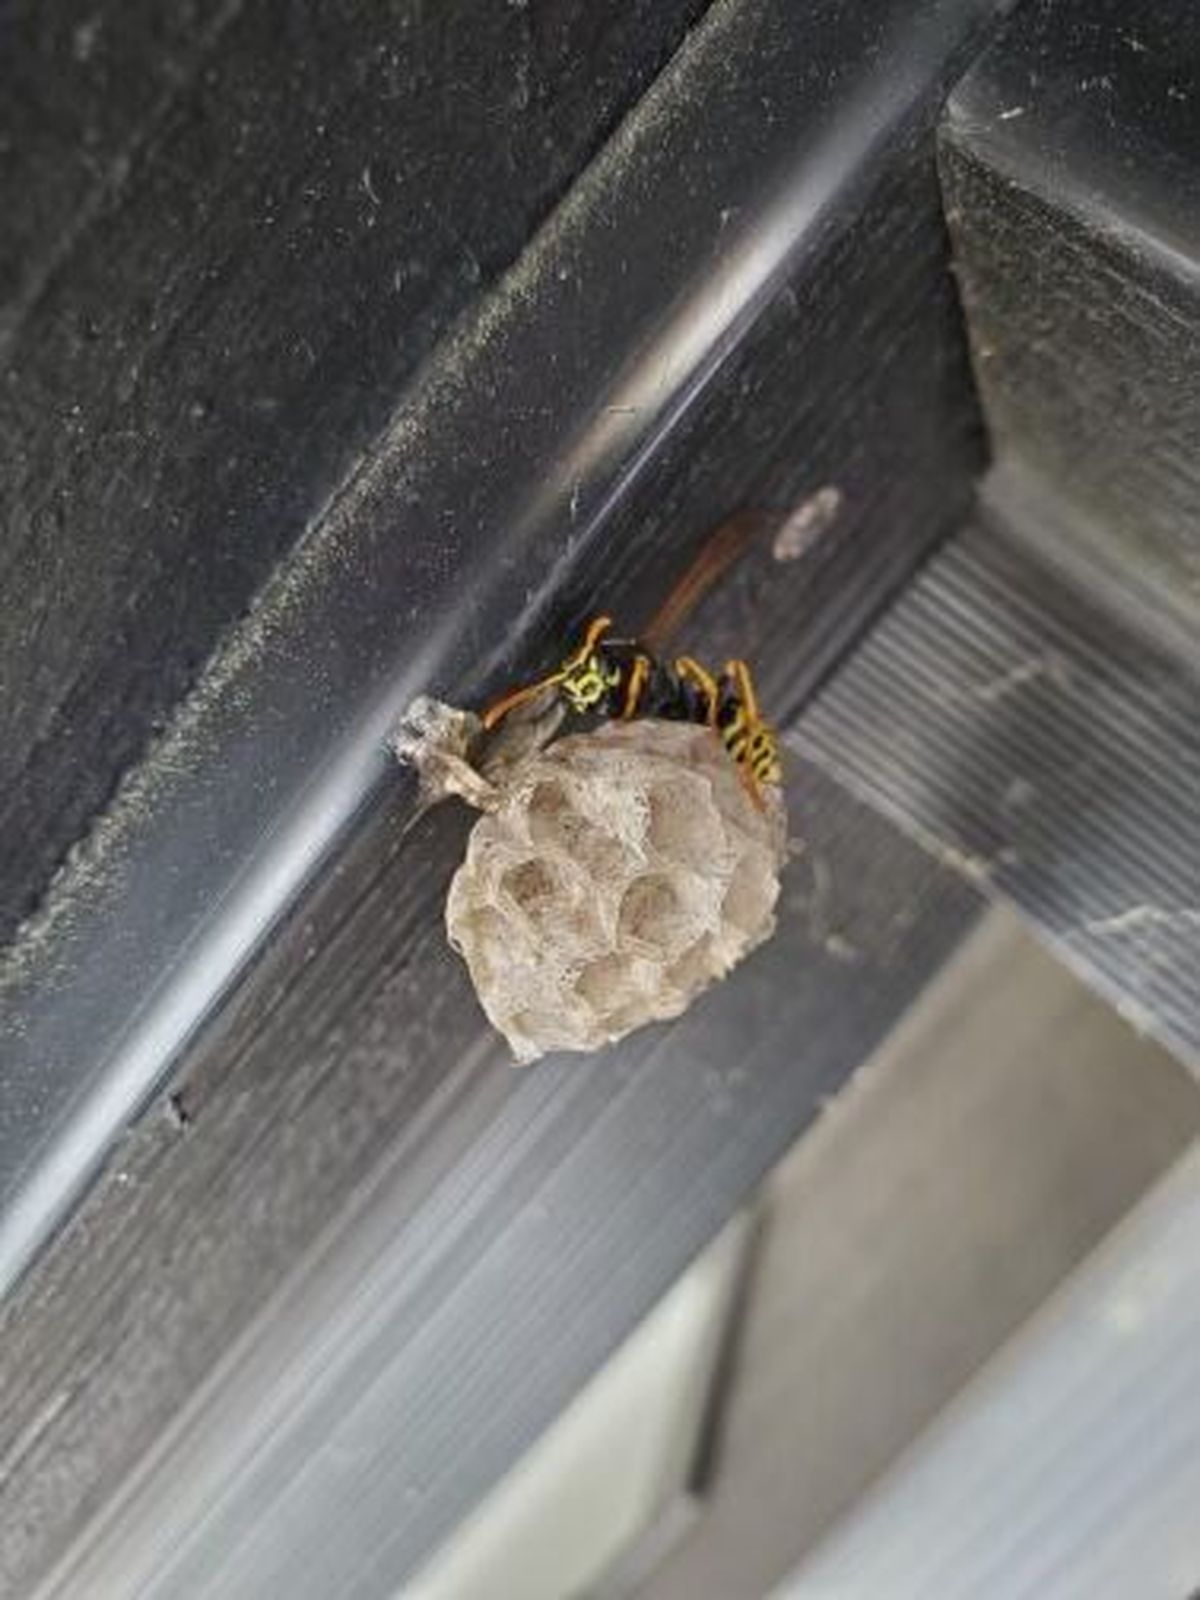 A wasp nest that was recently removed by Forrest Gissel of Pointe Pest Control.  (Forrest Gissel/Pointe Pest Control)